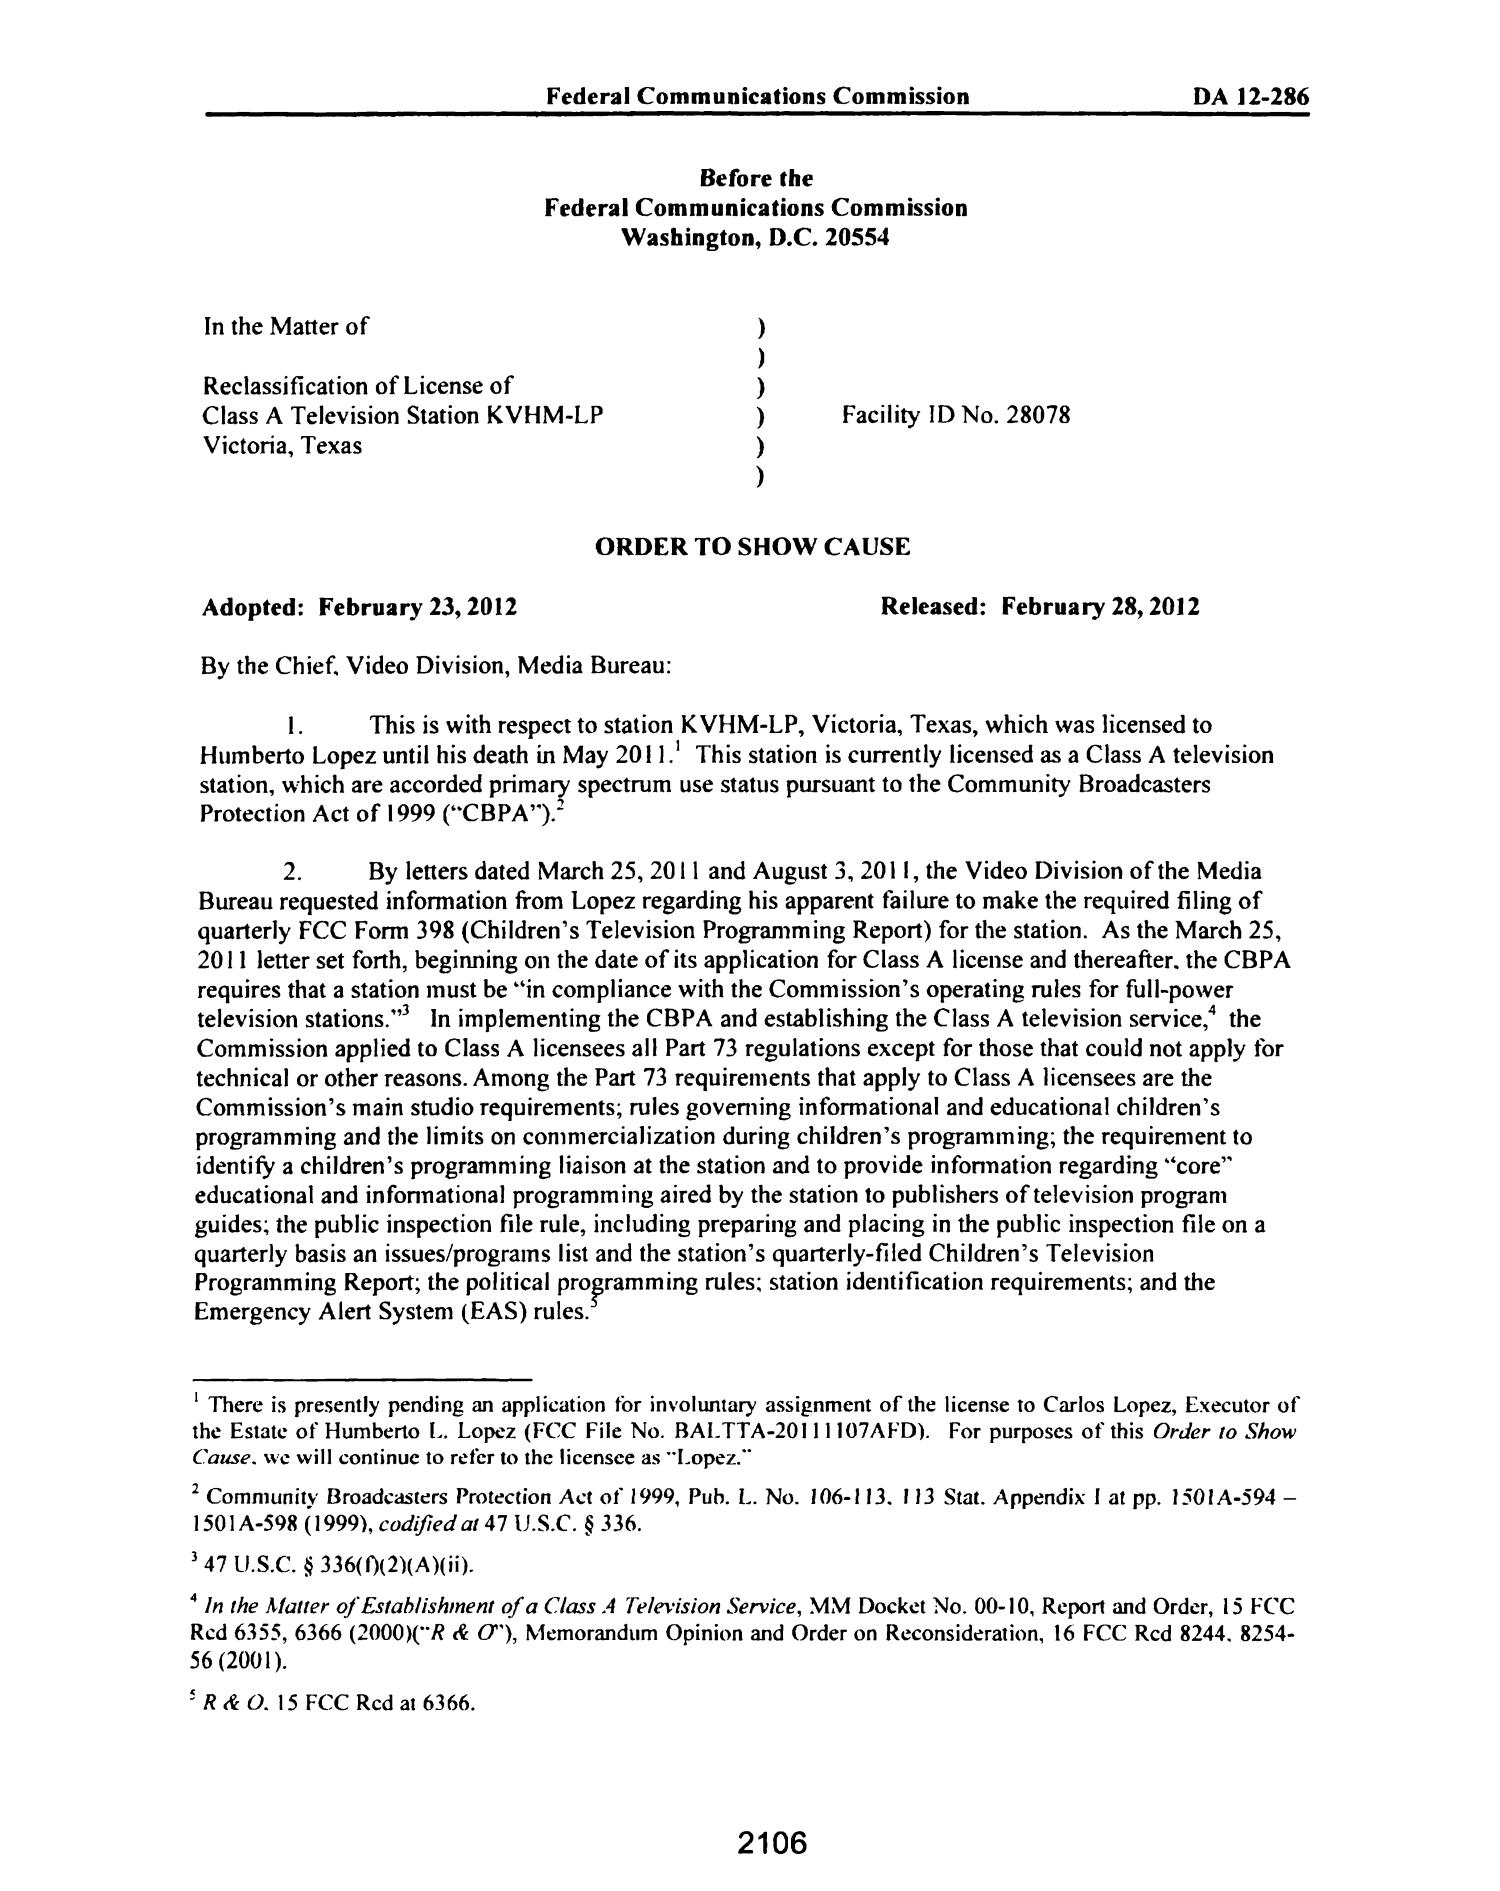 FCC Record, Volume 27, No. 3, Pages 1878 to 2785, February 21 - March 16, 2012
                                                
                                                    2106
                                                